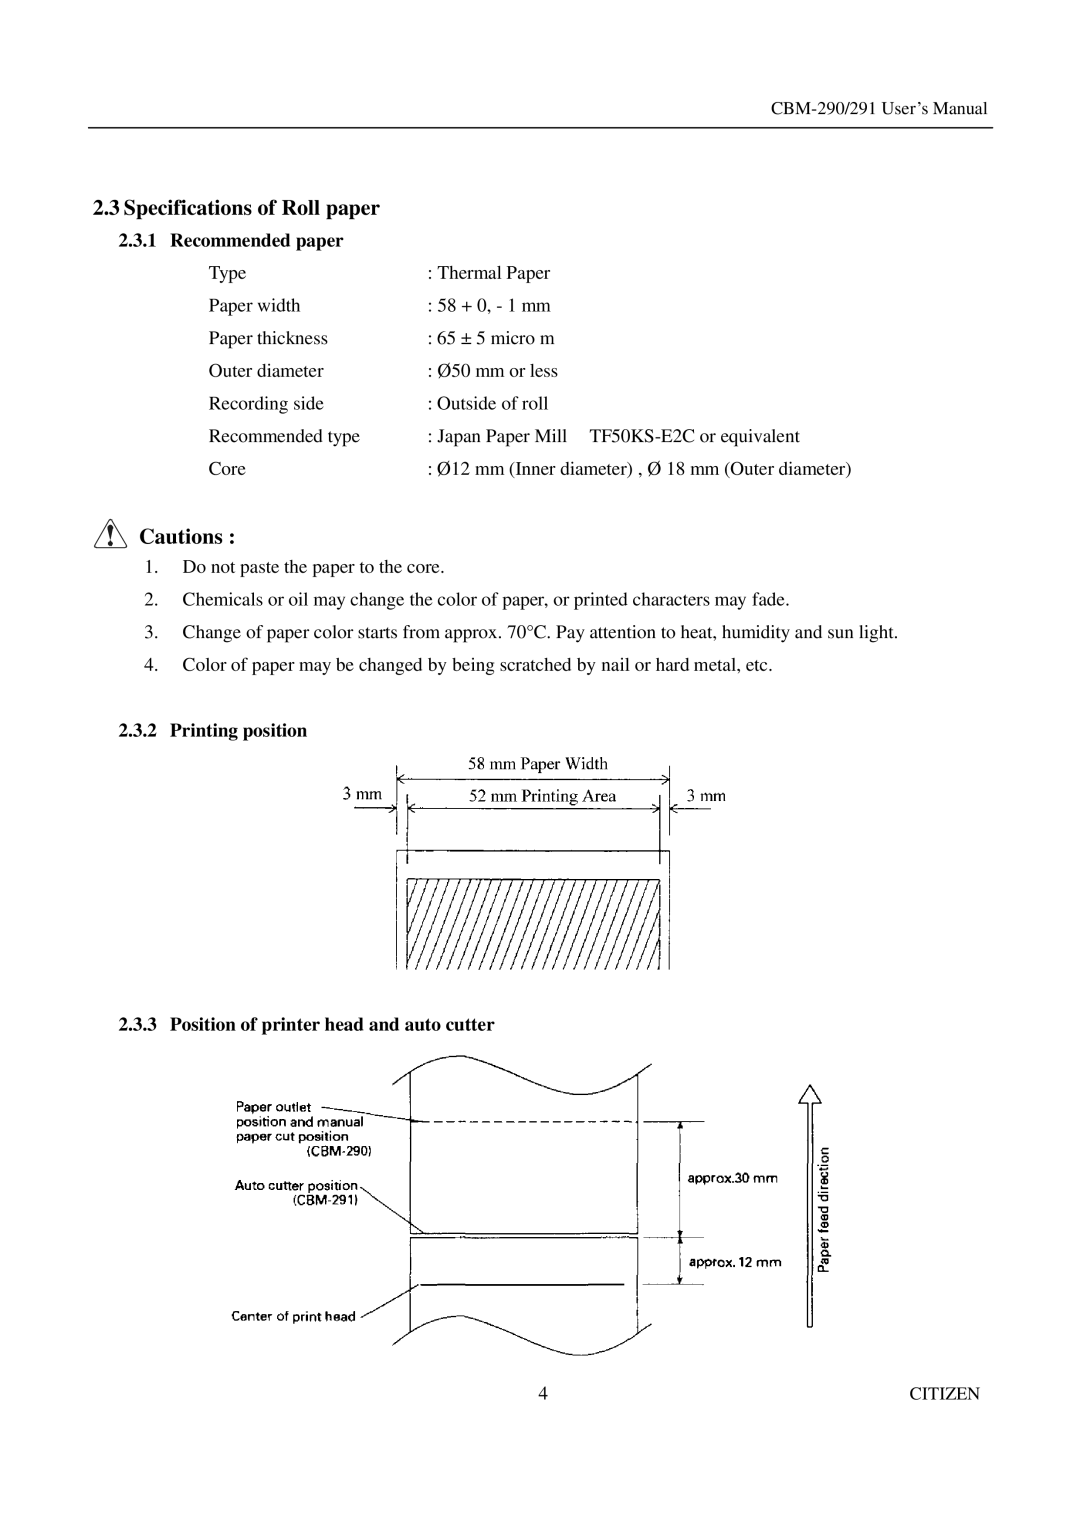 Citizen Systems CBM-290, 291 user manual Specifications of Roll paper, Recommended paper 